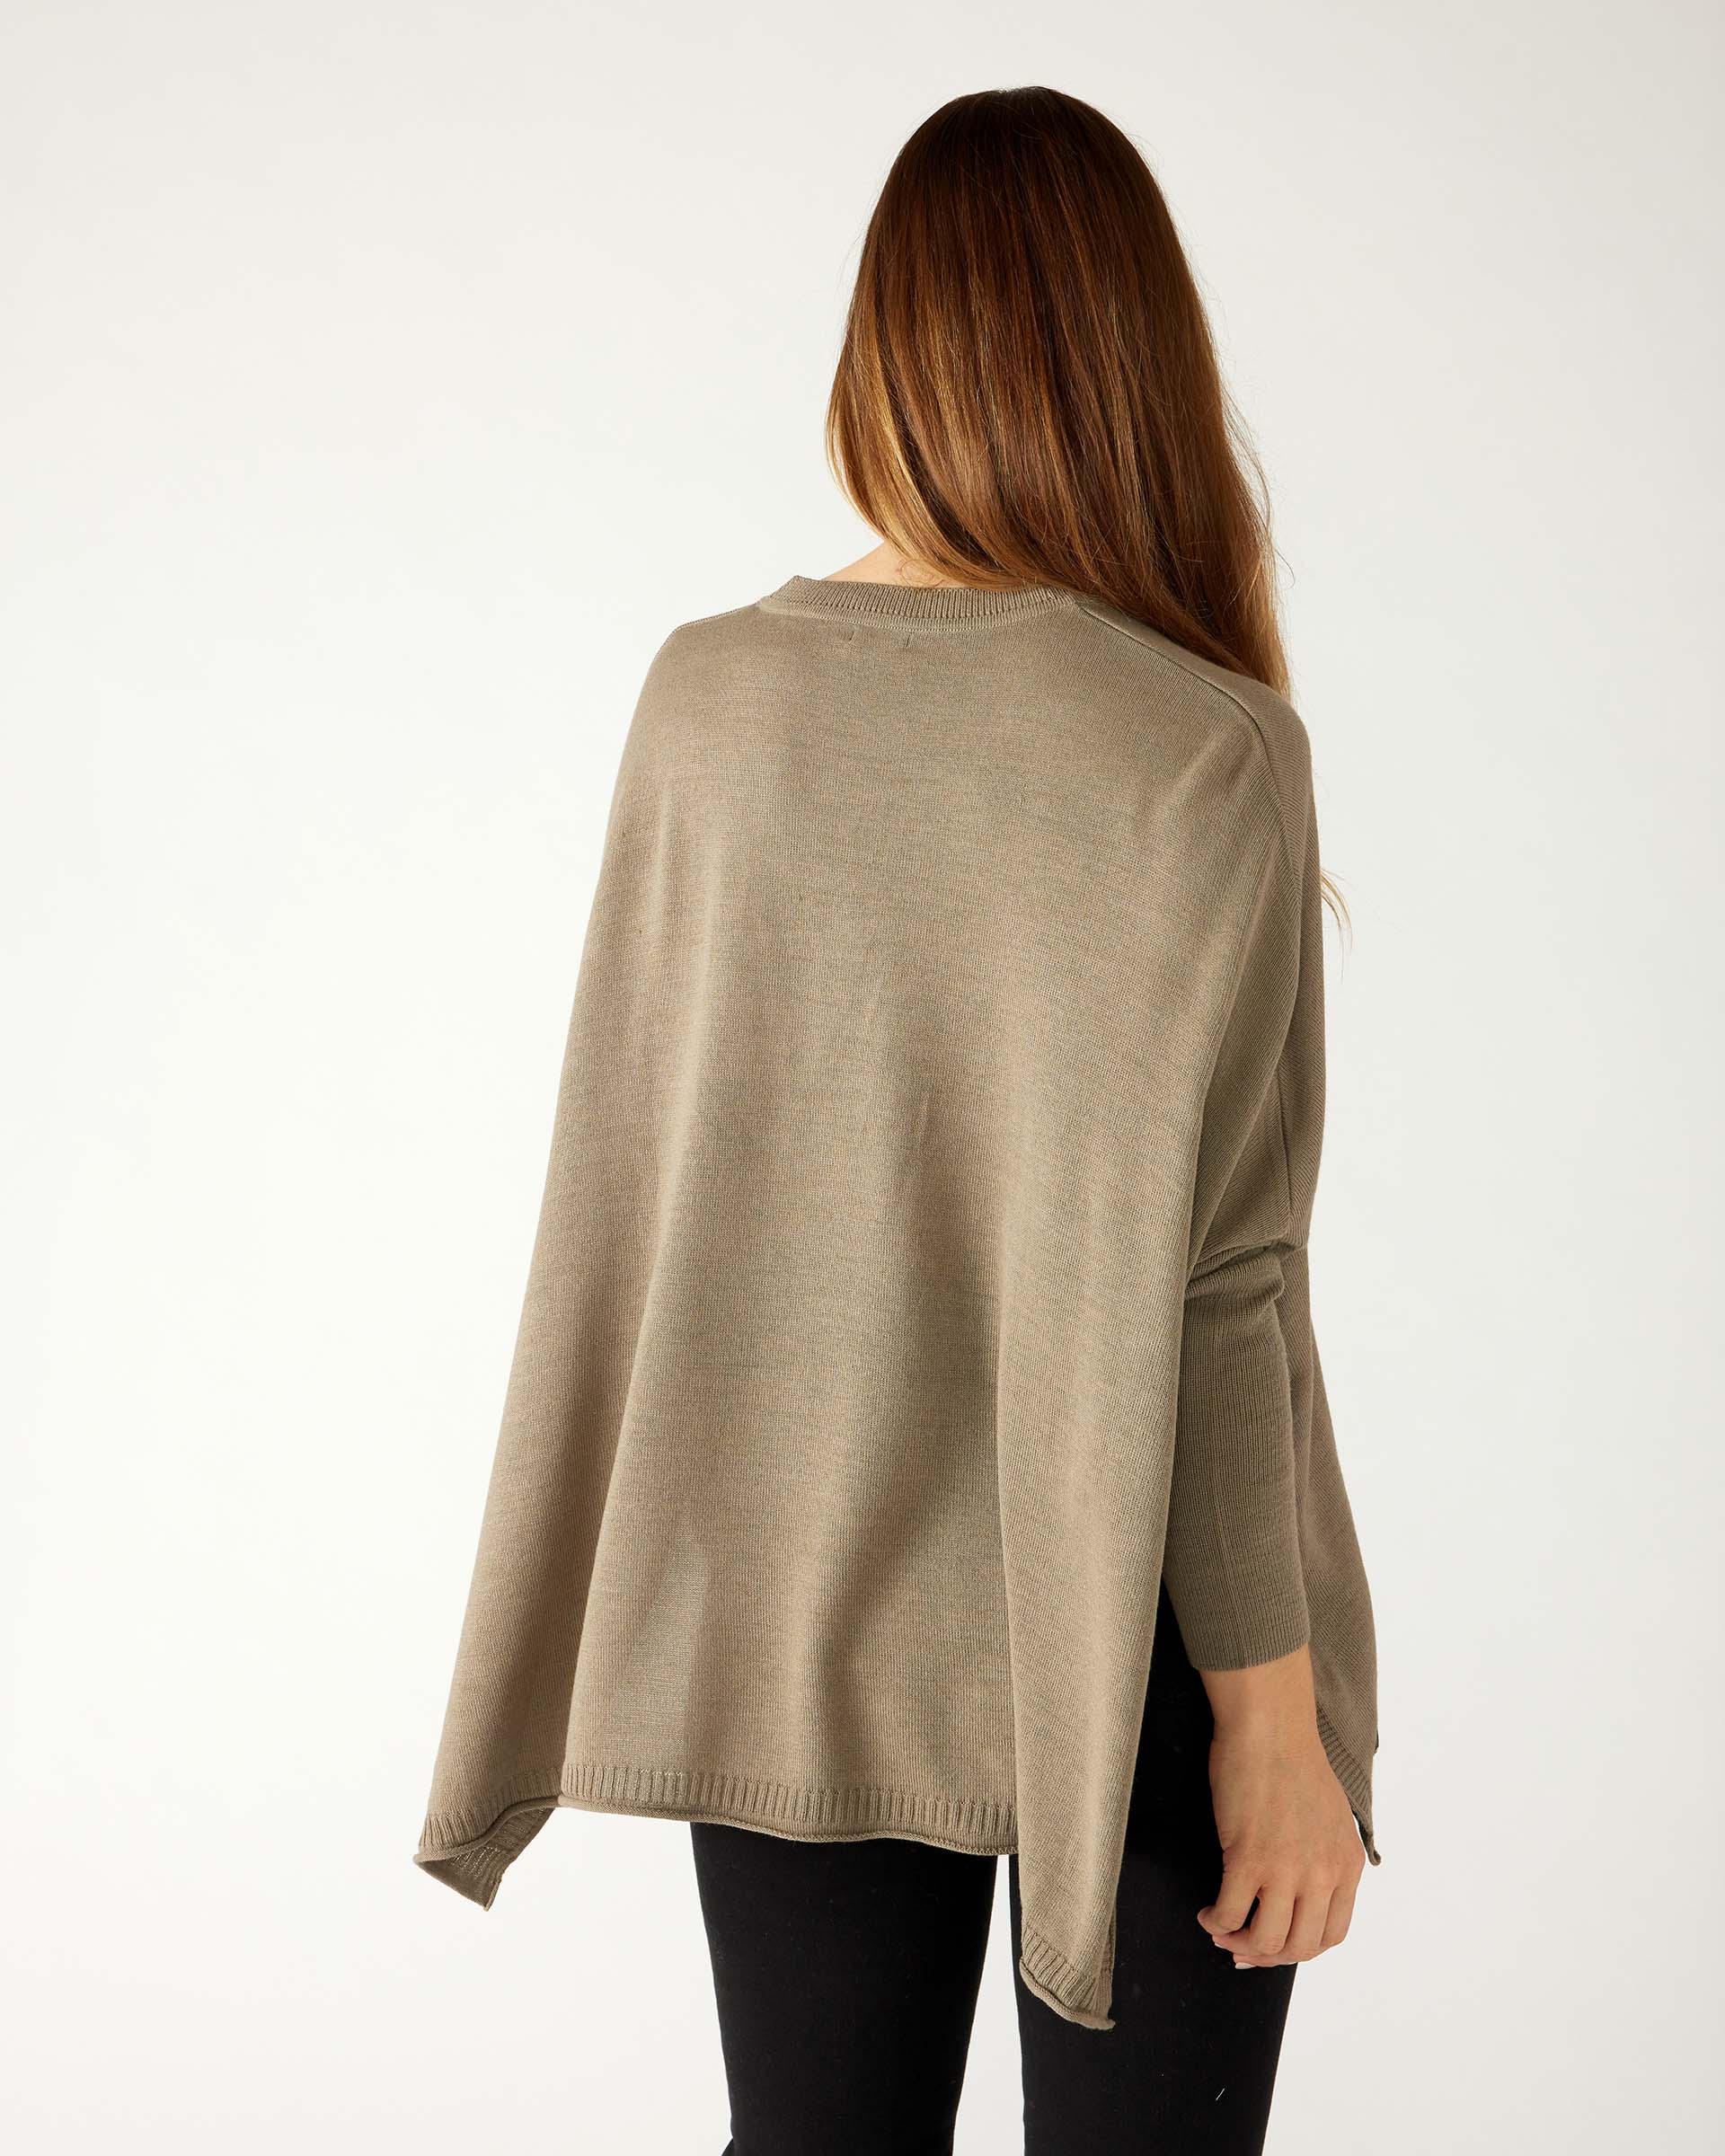 rearview of woman wearing mersea catalina v-neck sweater in hazelnut color